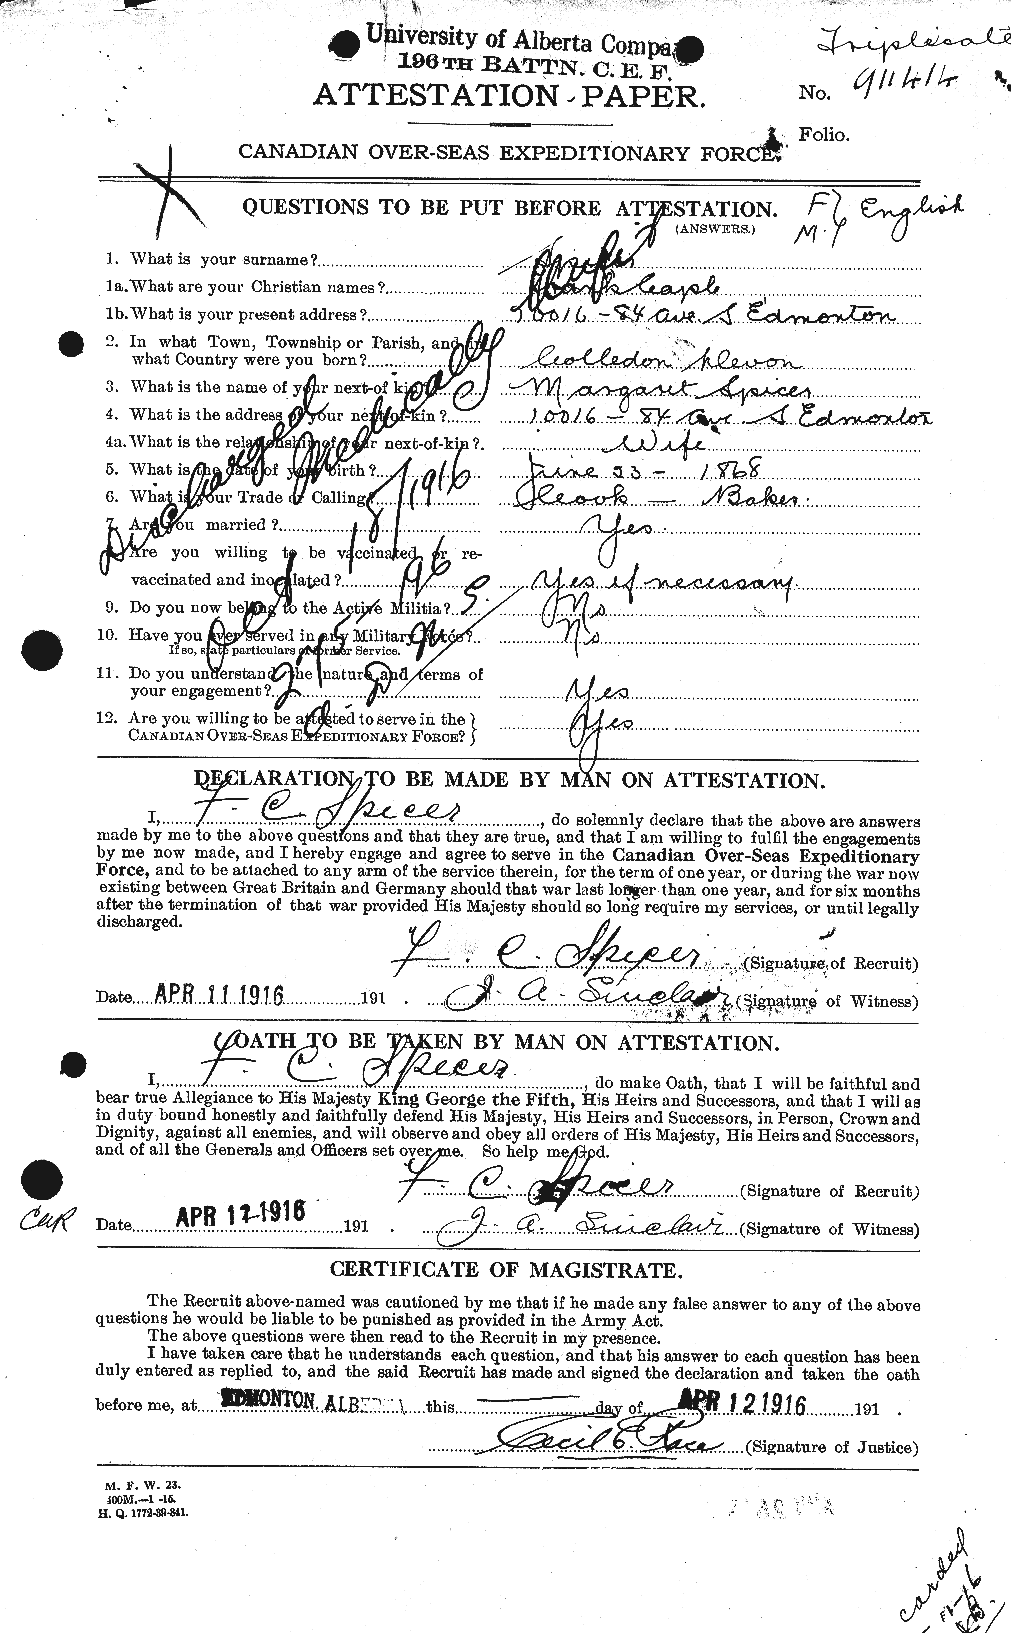 Personnel Records of the First World War - CEF 113896a